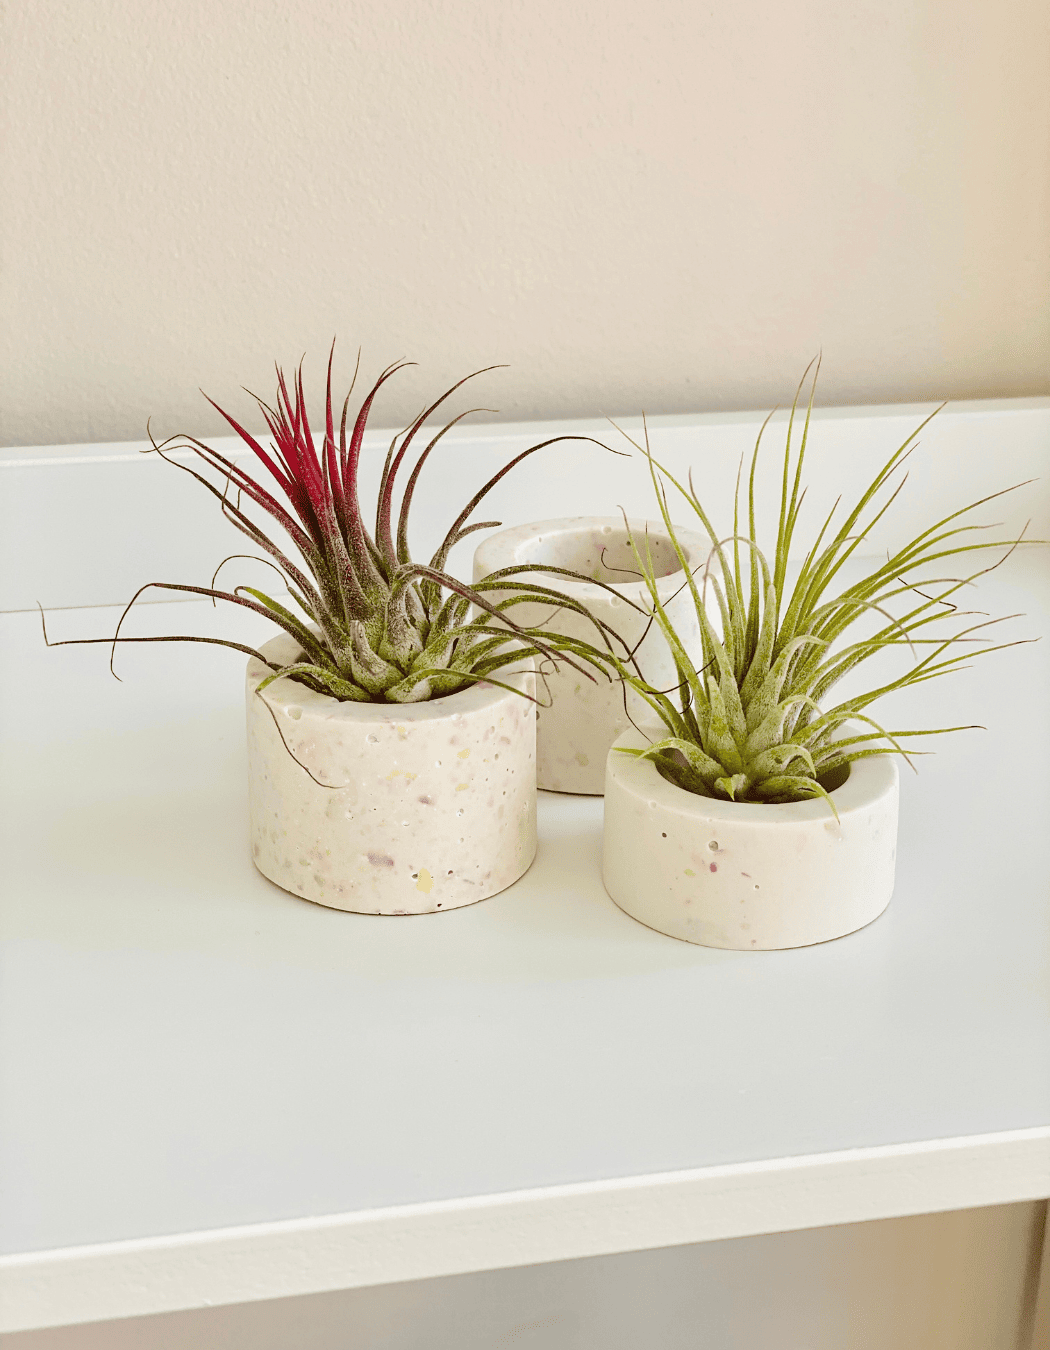 Hard-to-kill indoor plant featuring air plant